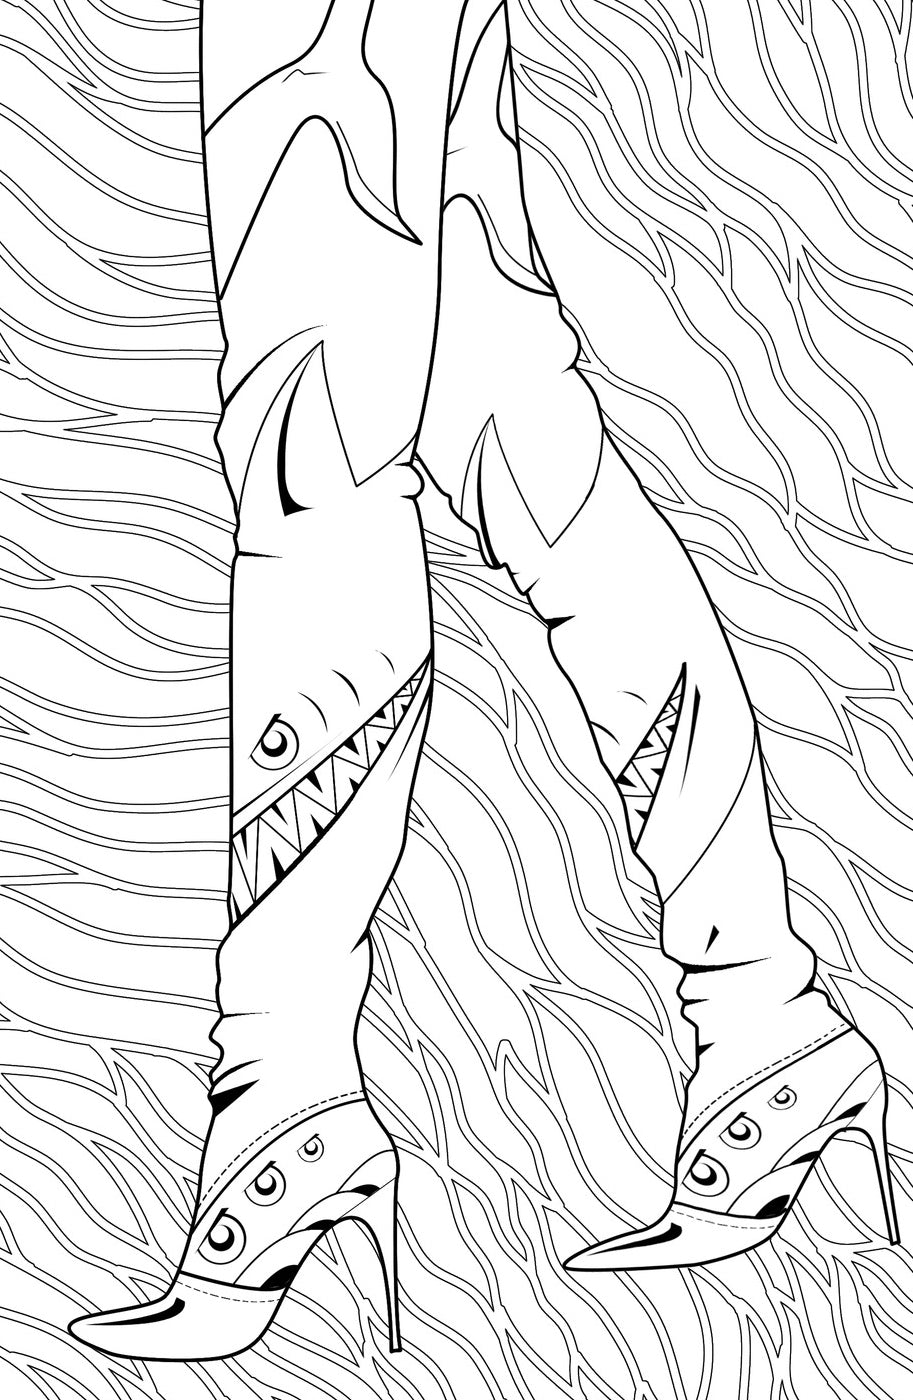 Sexy Legs - Women's High Heels Shoes Coloring Book